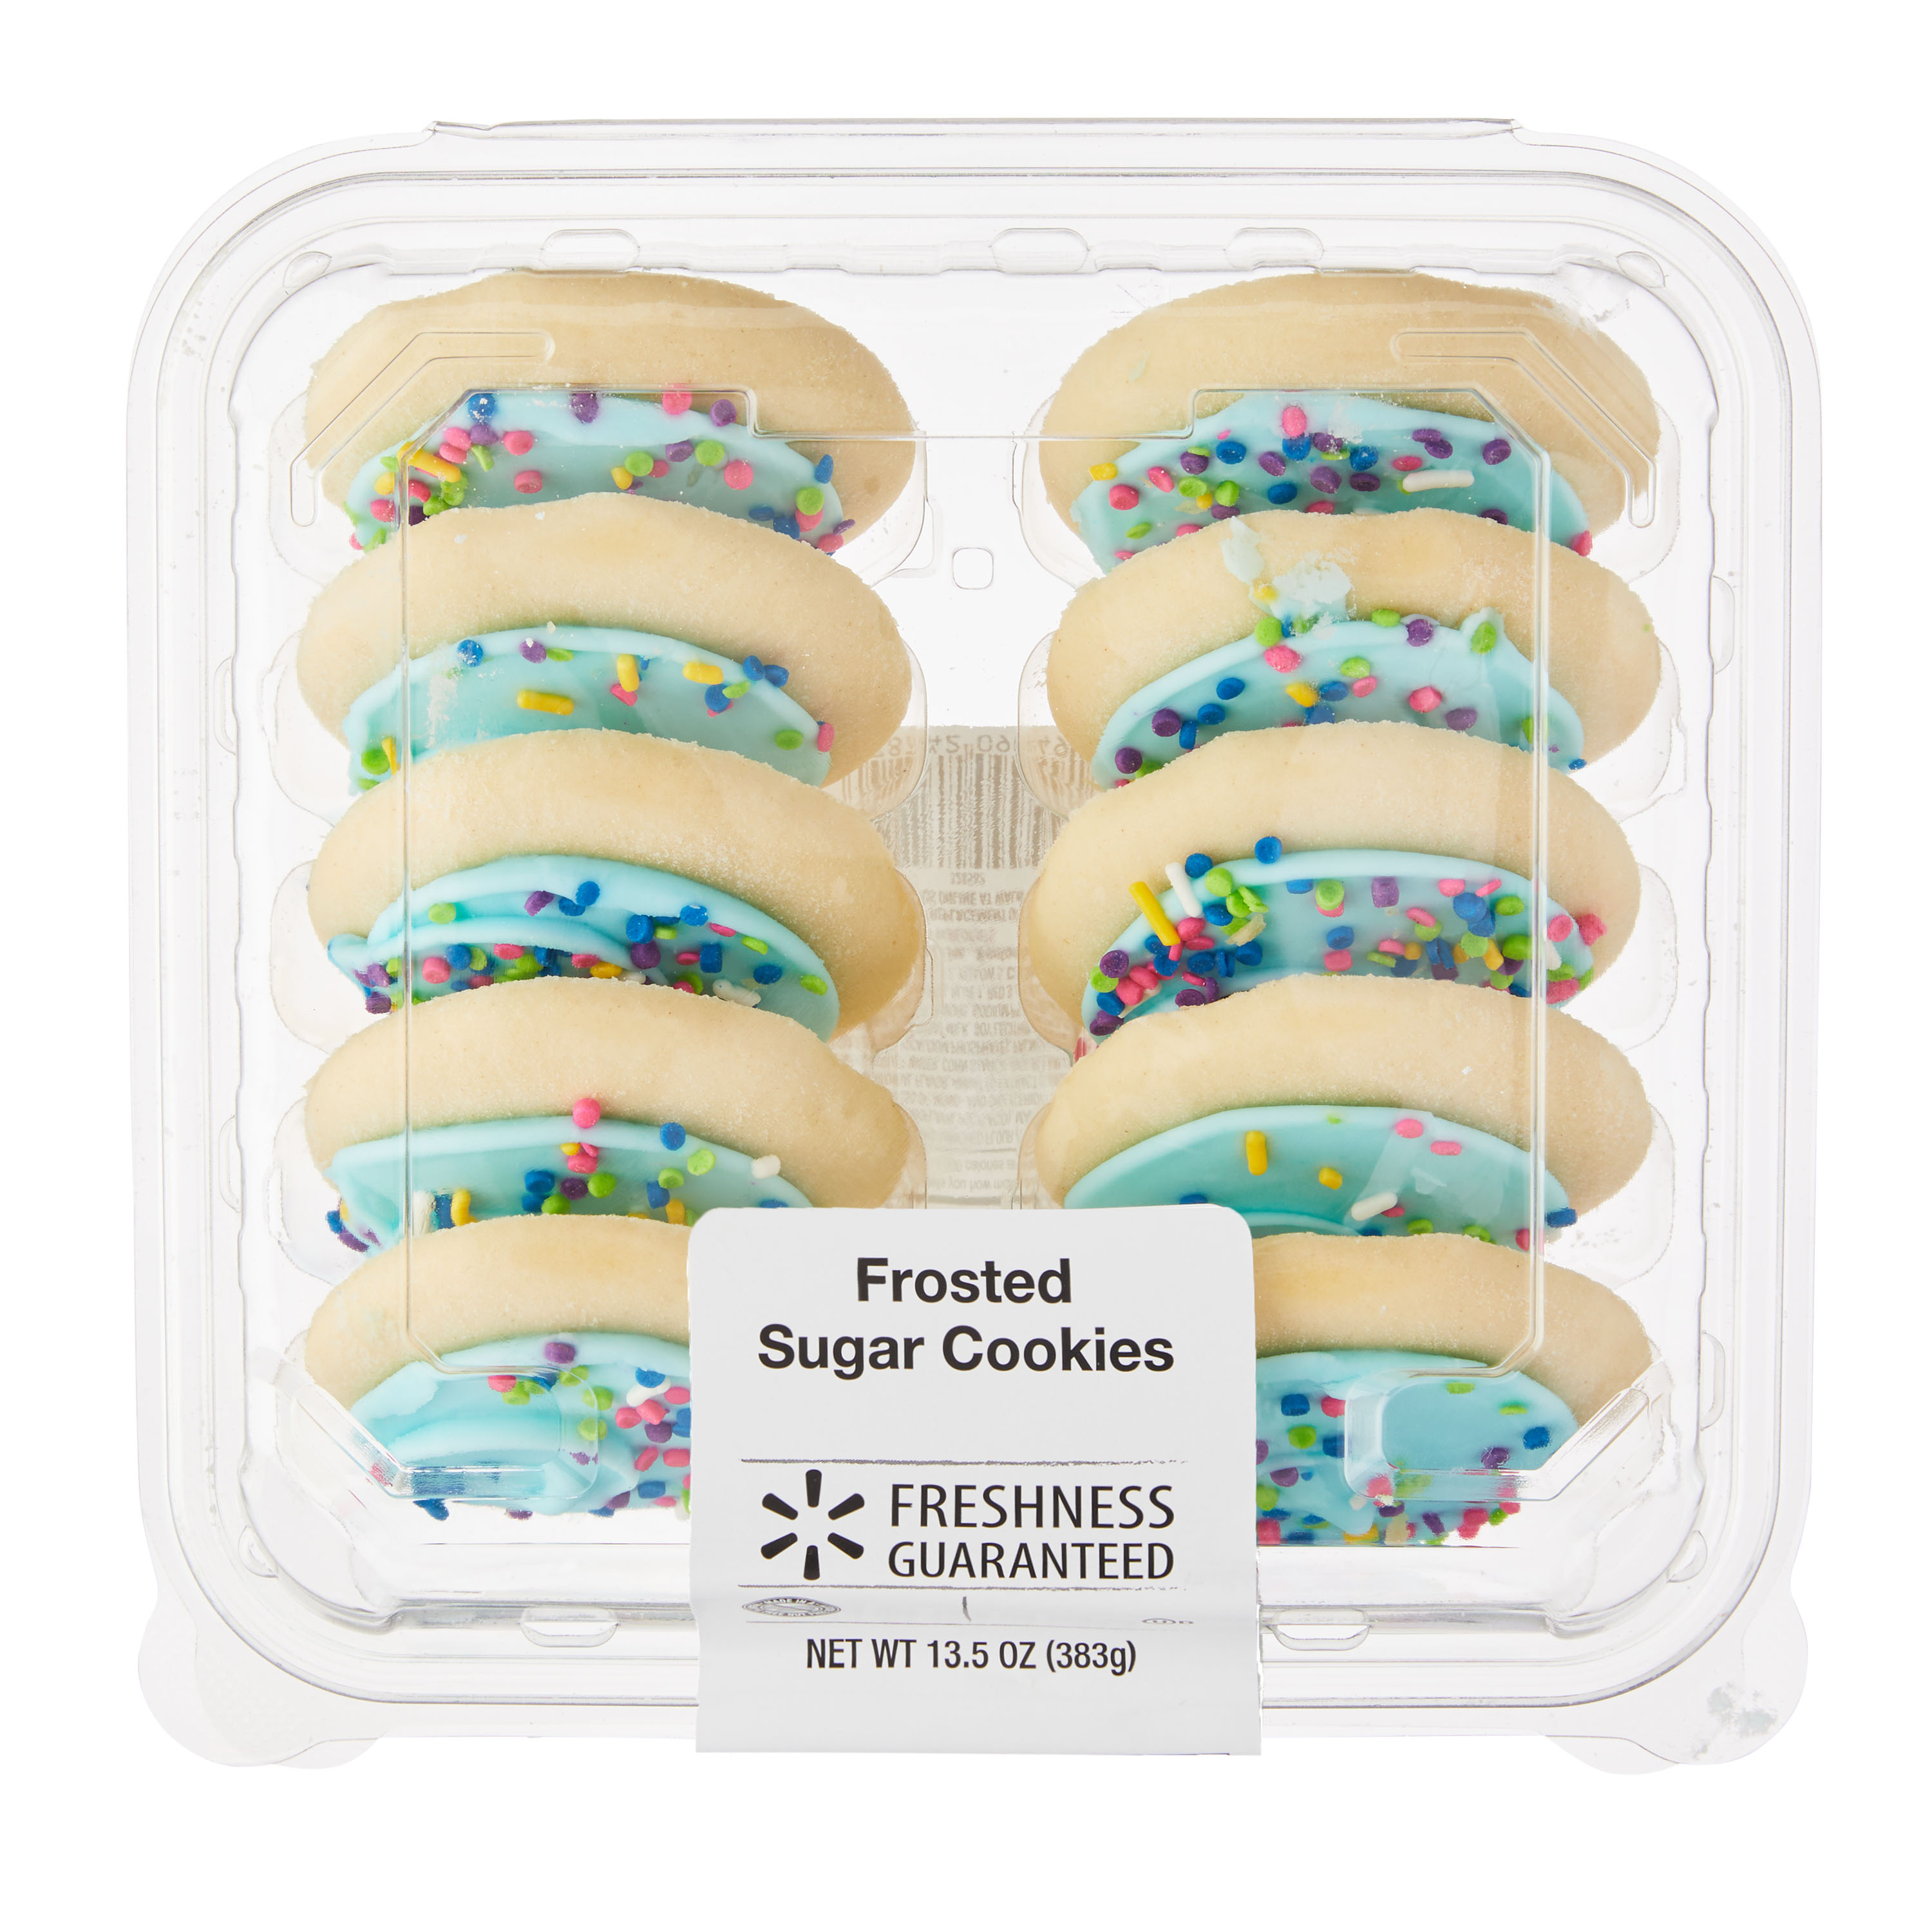 Freshness Guaranteed Frosted Sugar Cookies, Blue, 13.5 oz,10 Count, Shelf-Stable/Ambient, Whole - image 4 of 9